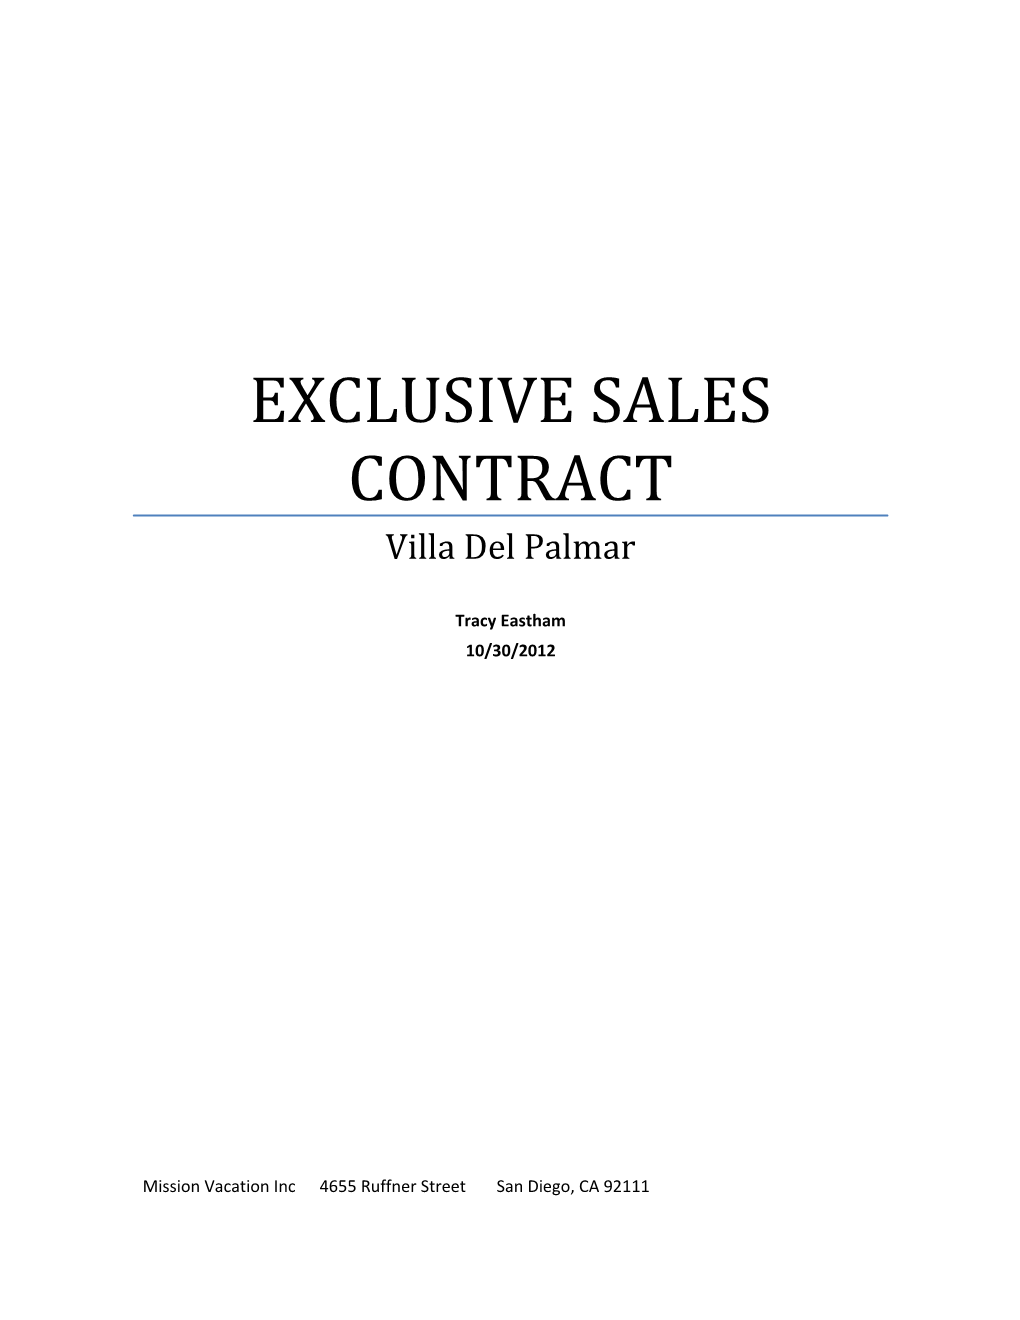 Exclusive Sales Contract